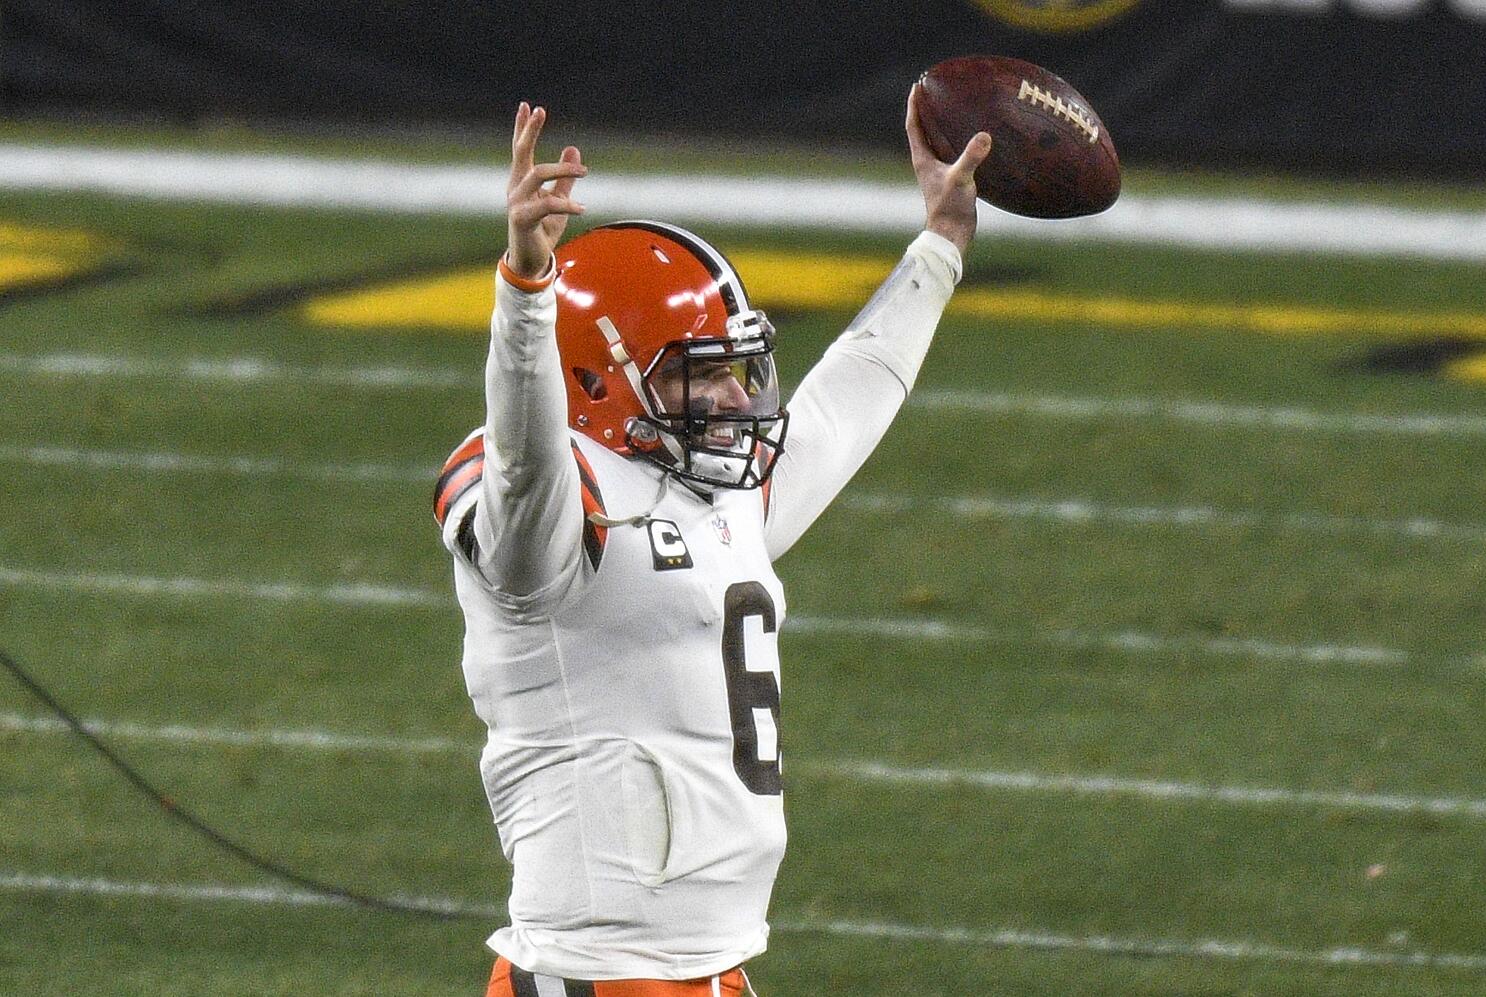 Steelers-Browns playoffs: Cleveland advances at last - The Washington Post